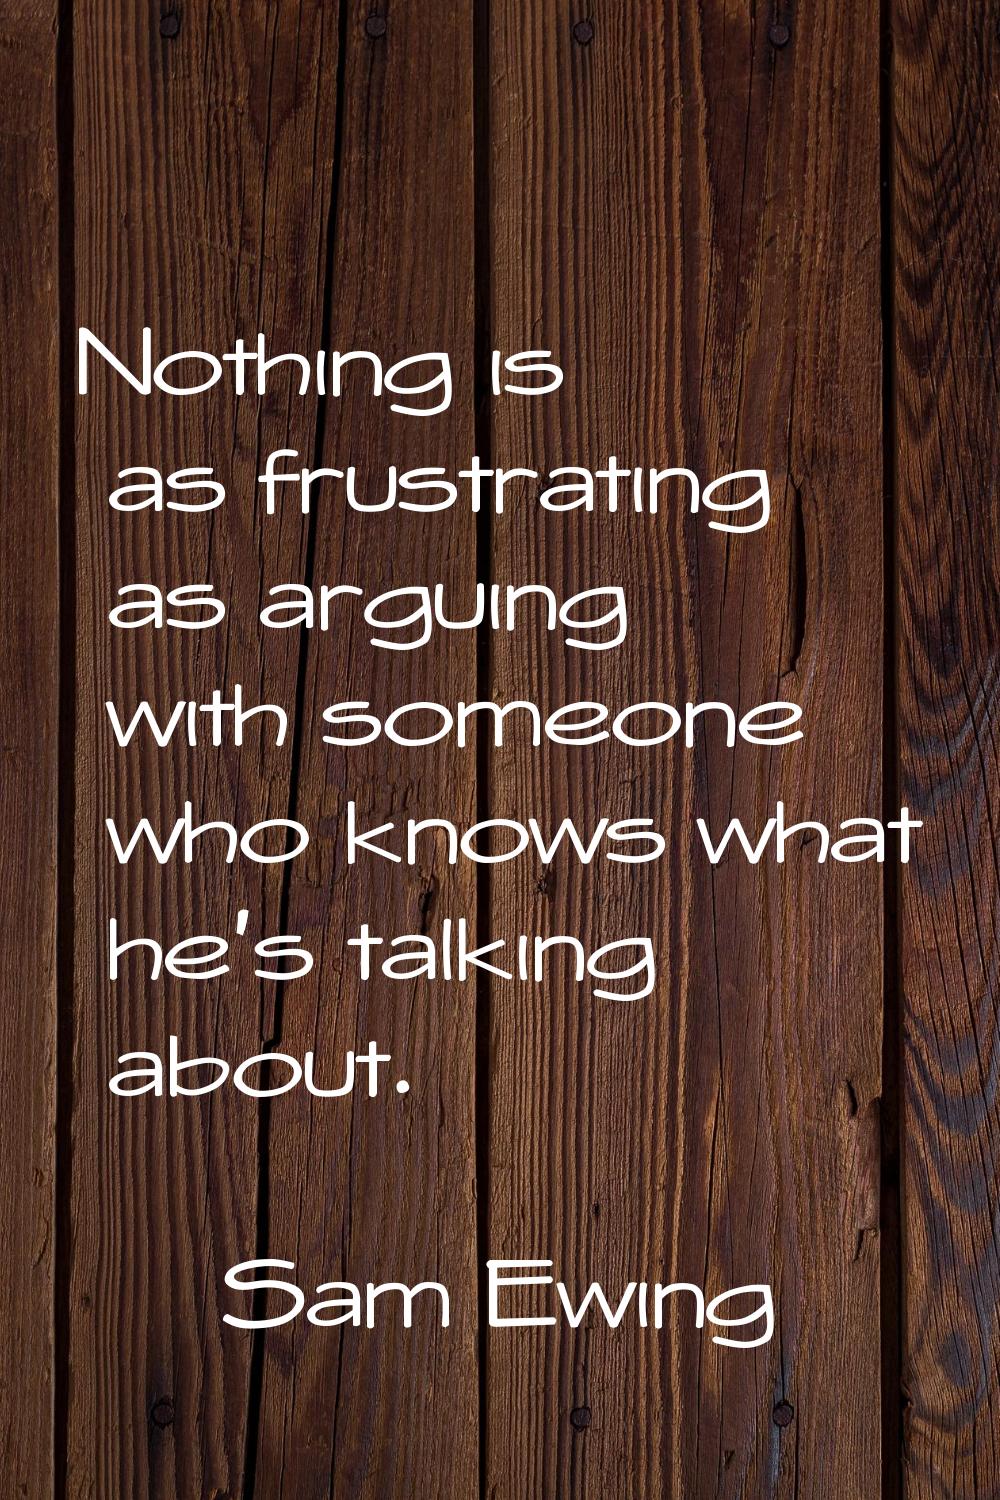 Nothing is as frustrating as arguing with someone who knows what he's talking about.